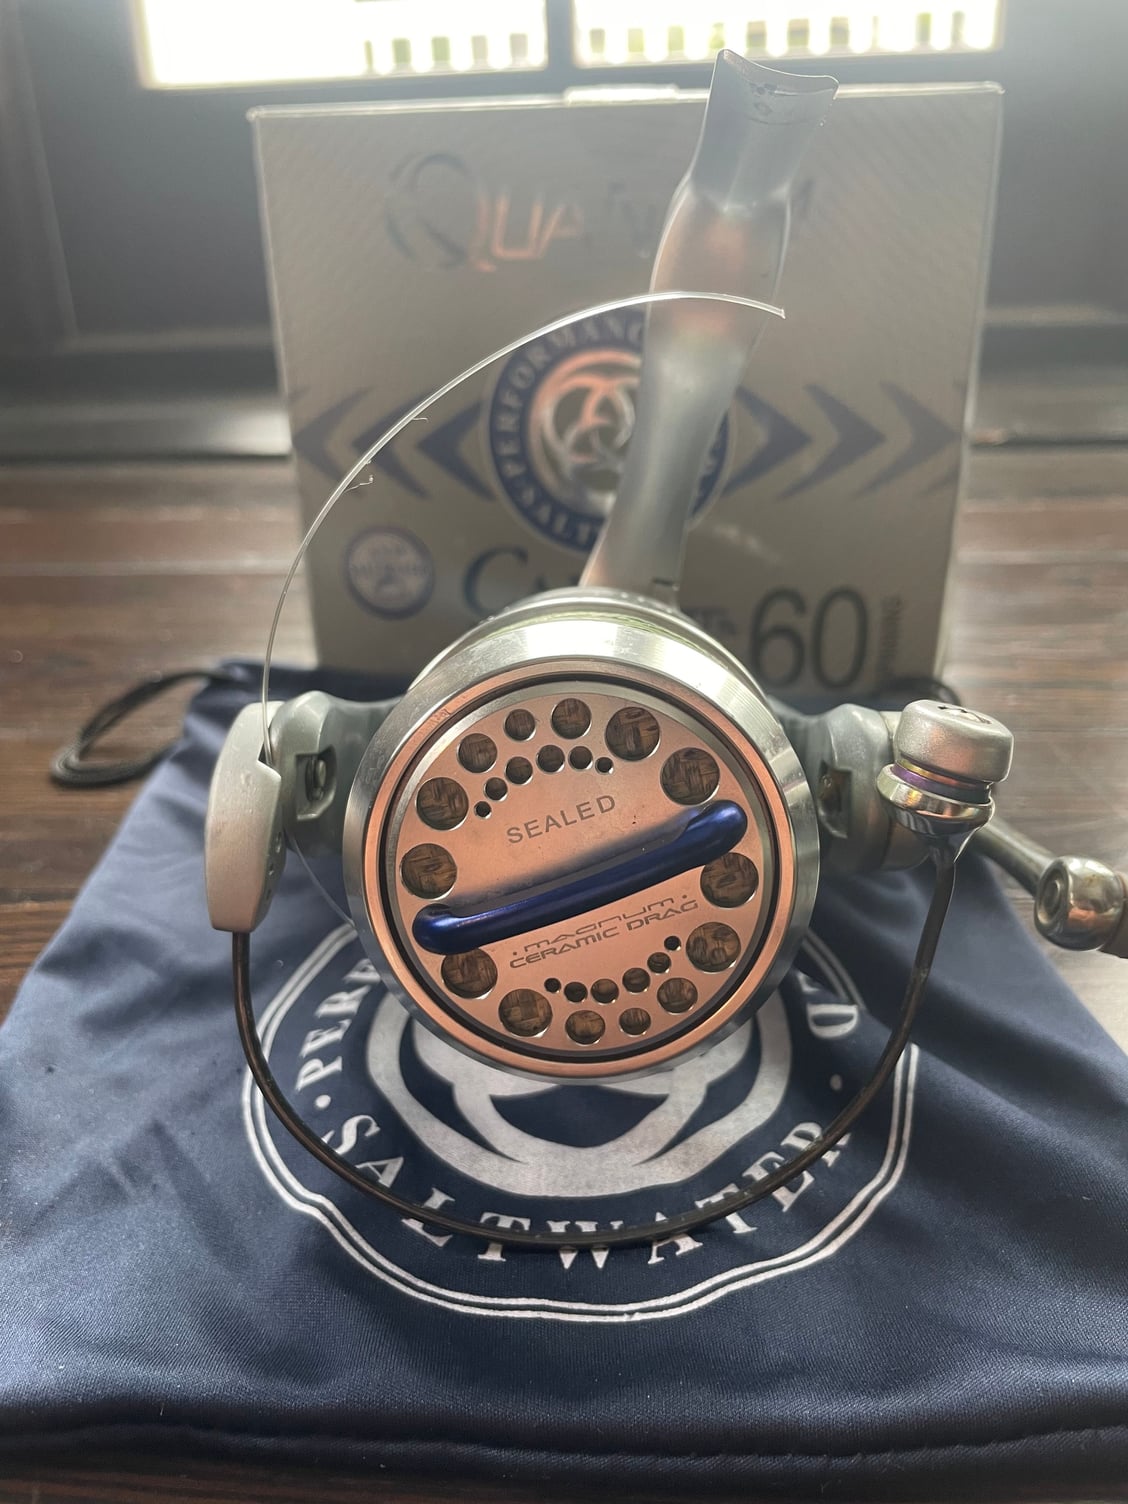 Cabo Quantum PTS60 spinning reel for sale - The Hull Truth - Boating and Fishing  Forum